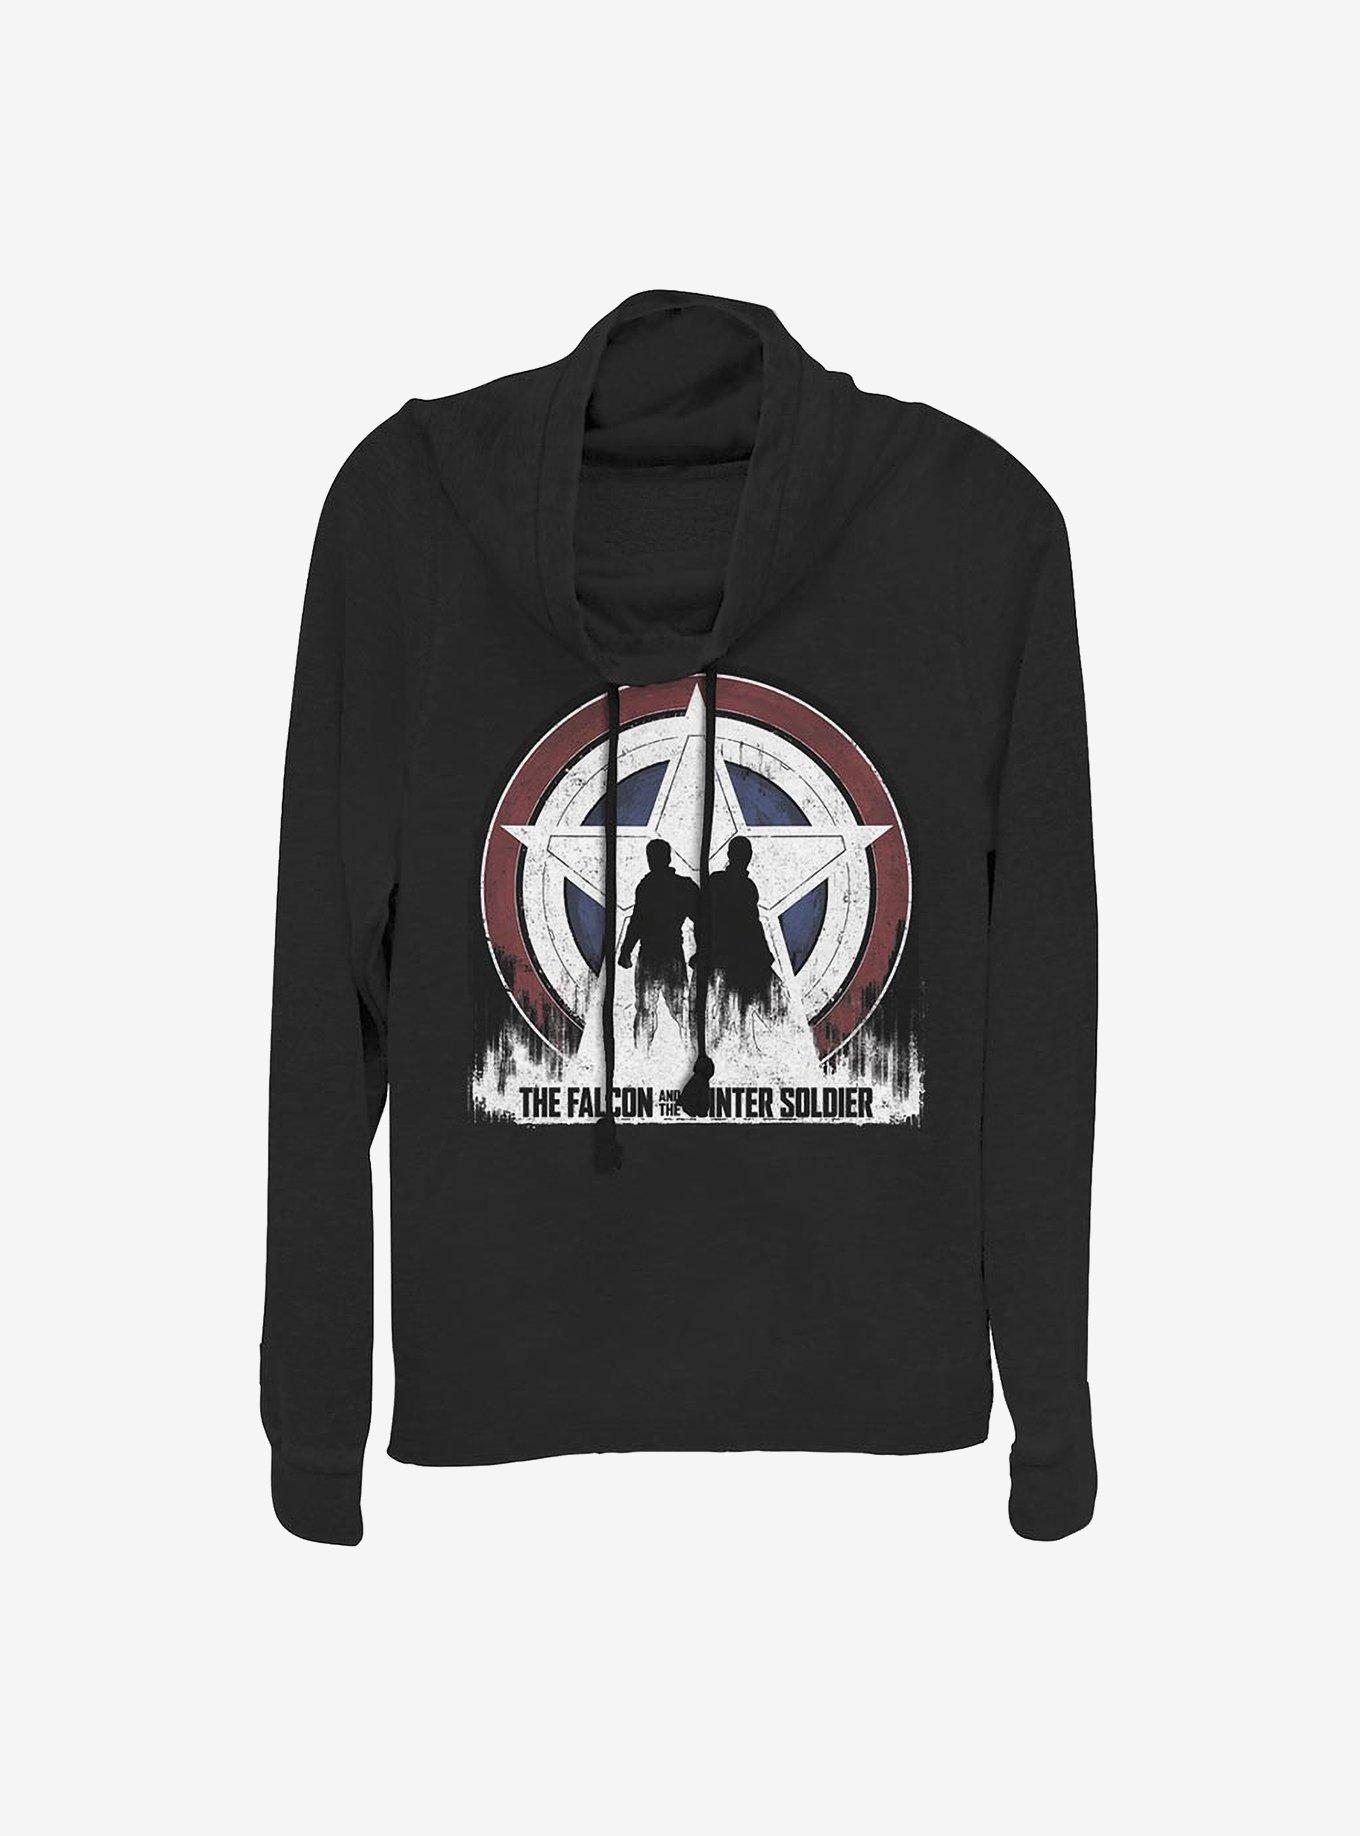 Marvel The Falcon And The Winter Soldier Silhouette Shield Cowlneck Long-Sleeve Girls Top, BLACK, hi-res